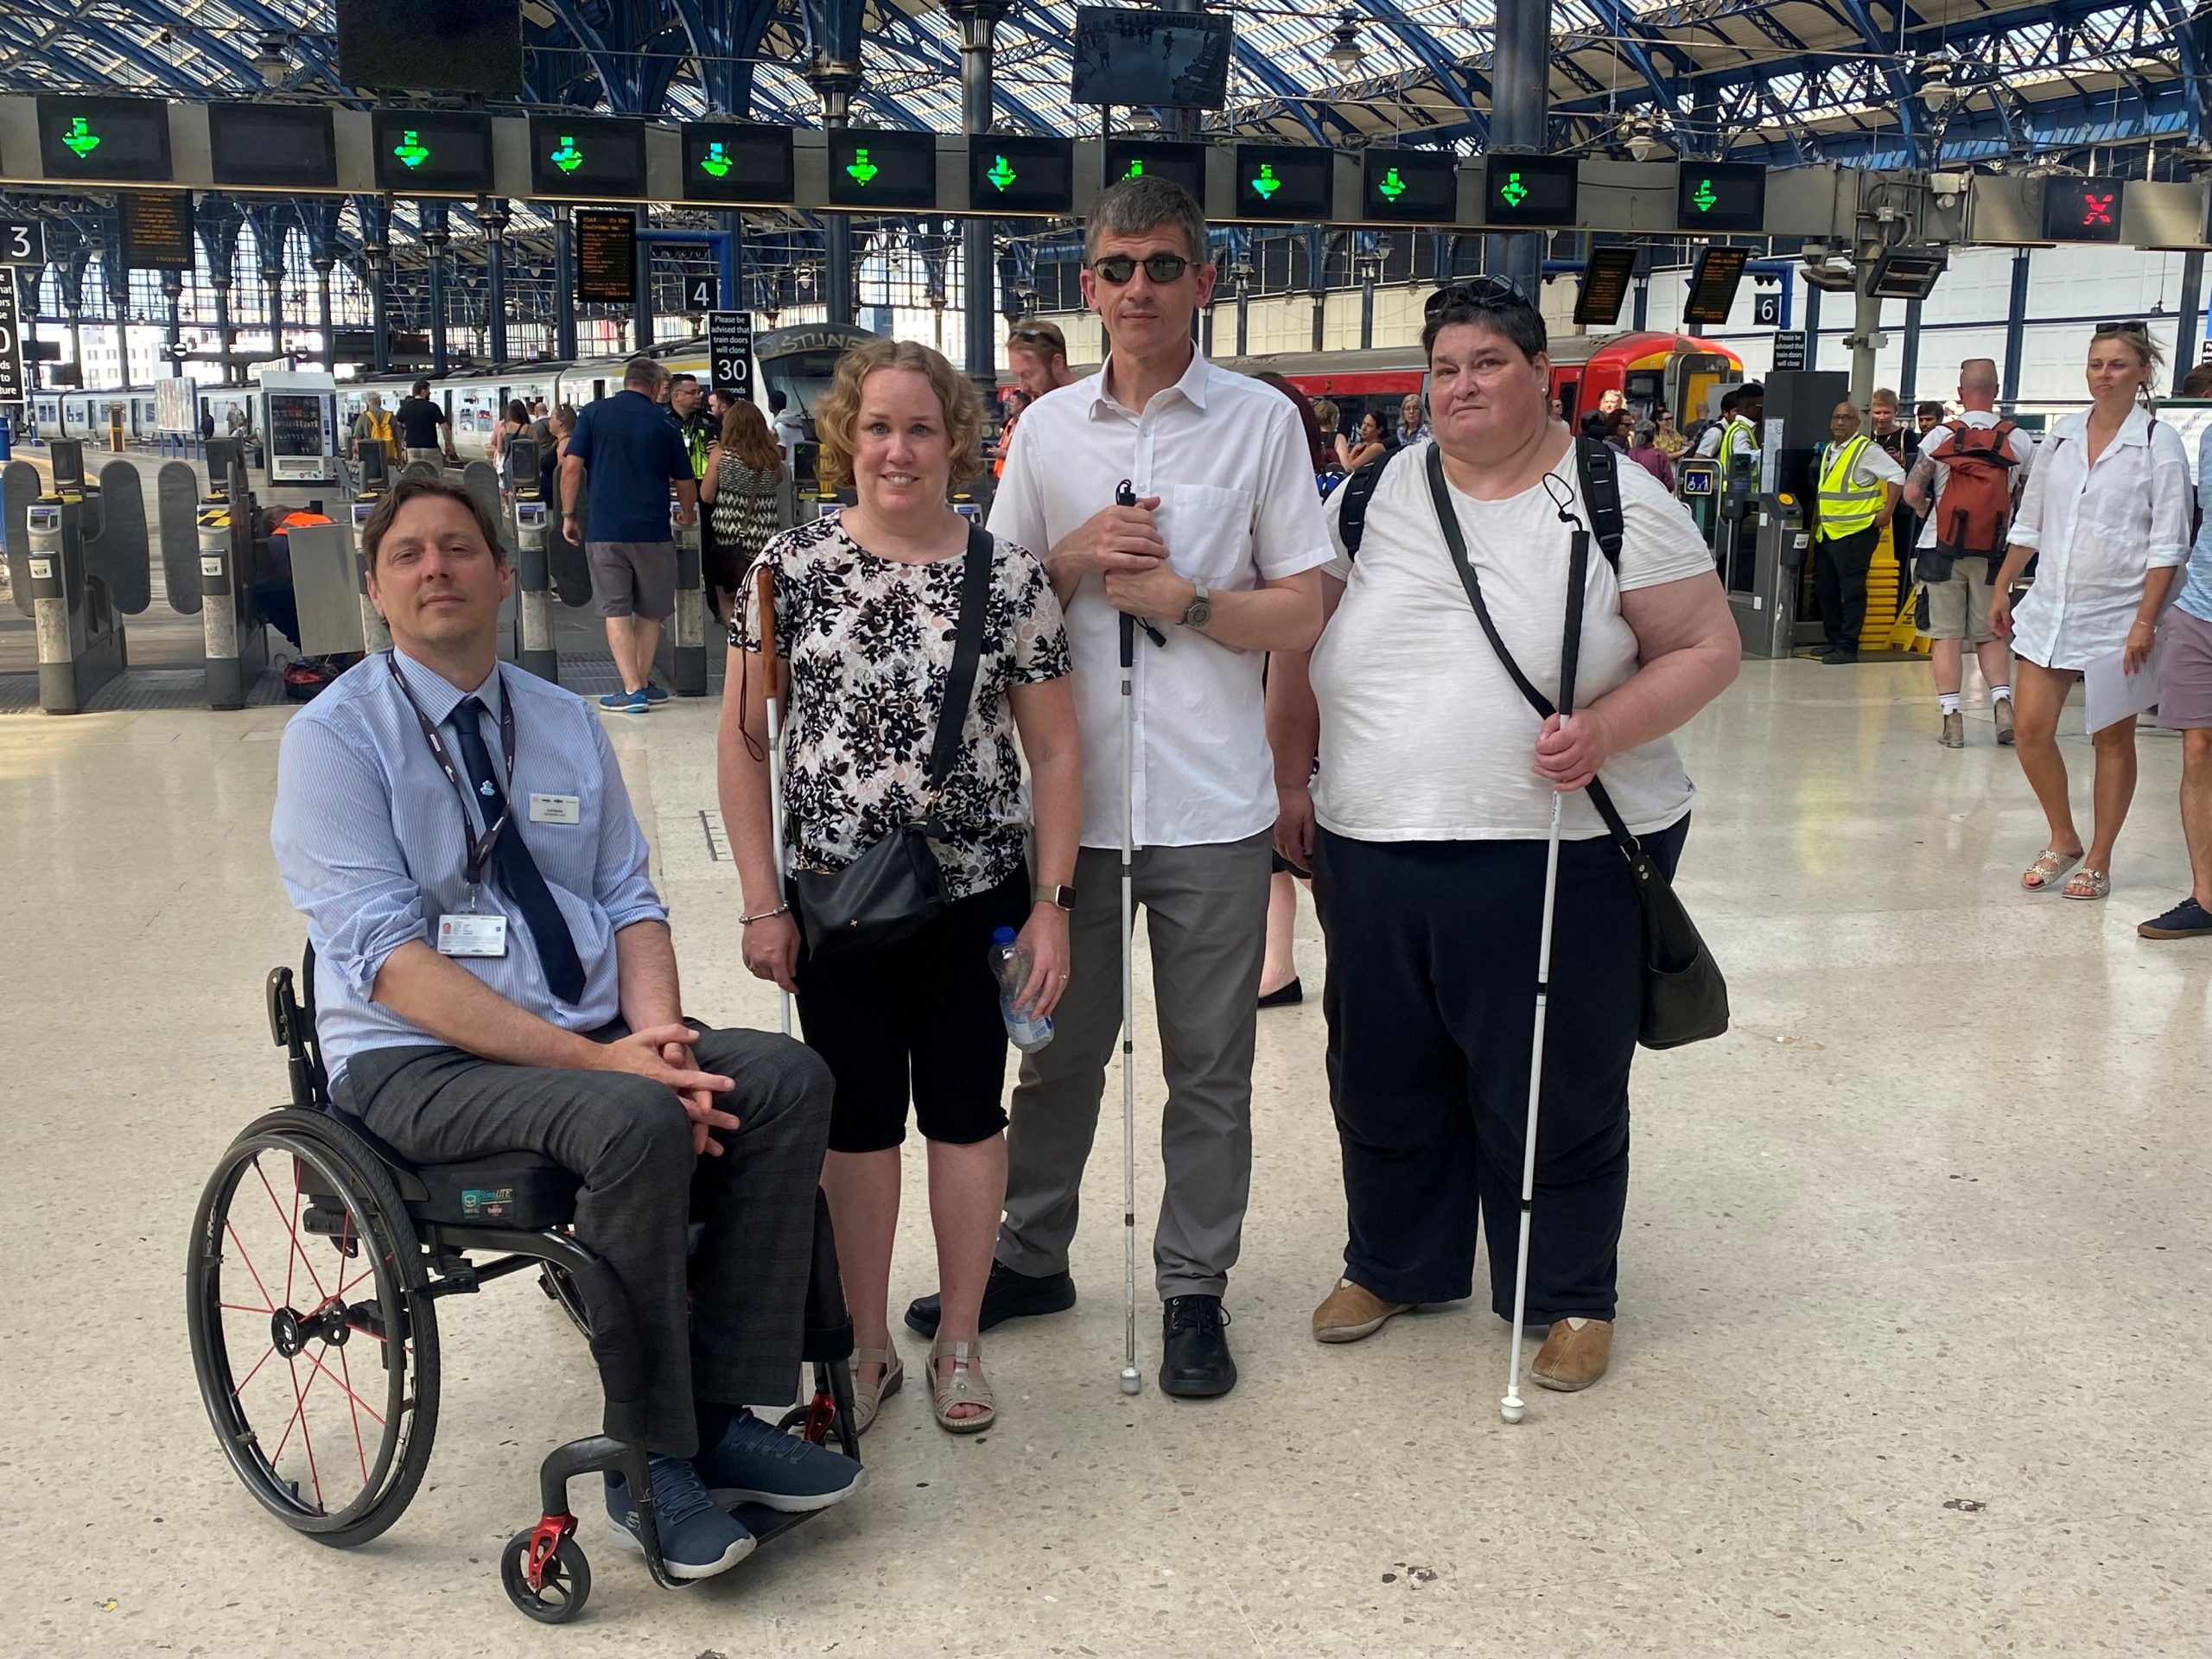 From left to right: Carl Martin, Accessibility Lead for Govia Thameslink Railways; Linn Davies, East Sussex SLC member; Dave Smith, Engagement Manager for the South East, and Iris Keppler, East Sussex SLC member. They are in the concourse of Brighton train station, looking at the camera, smiling.